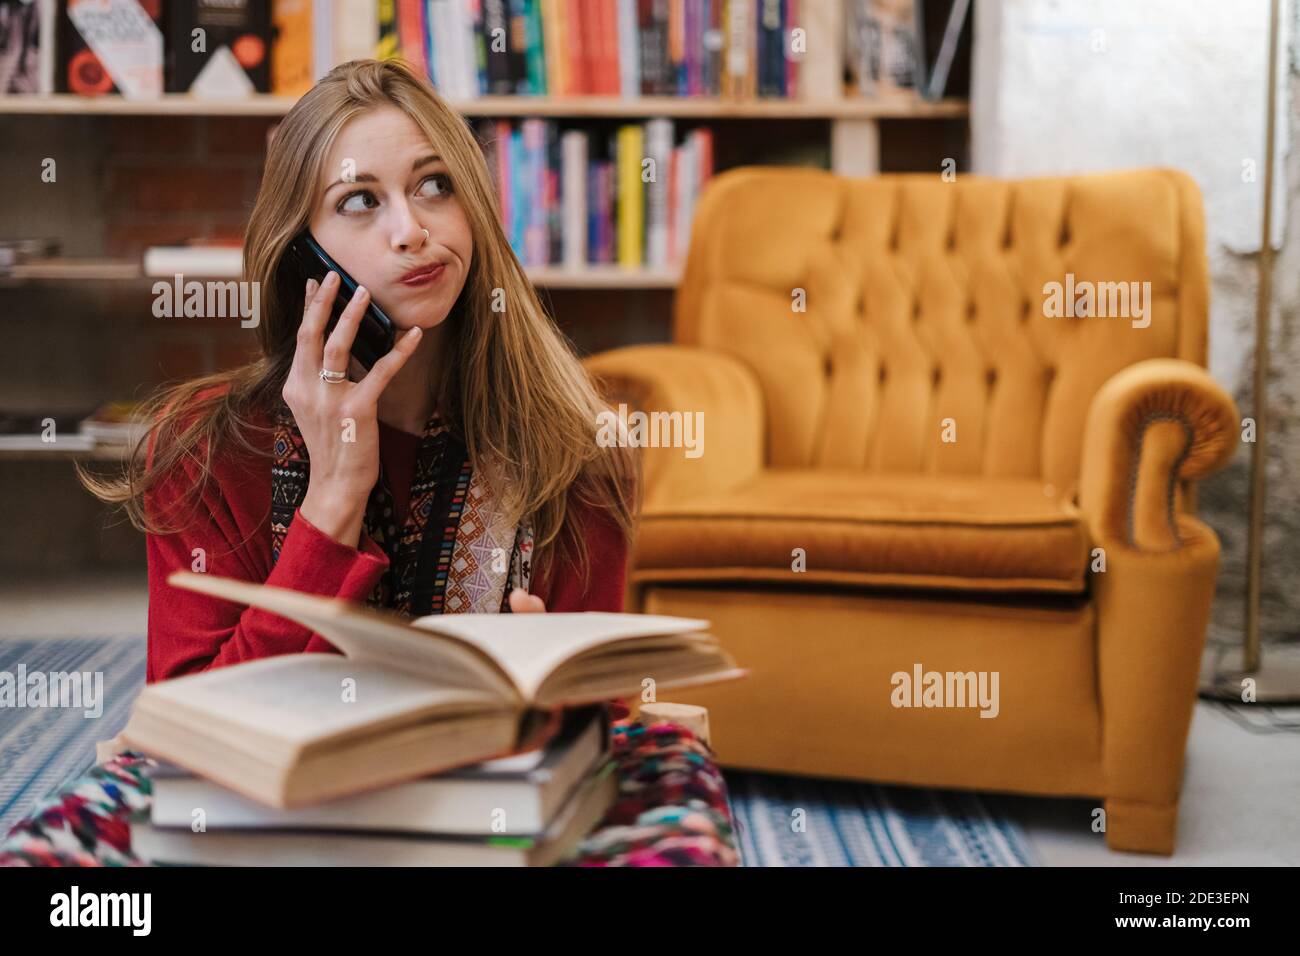 Blonde woman answering a call on hold at a bookstore. Stock Photo